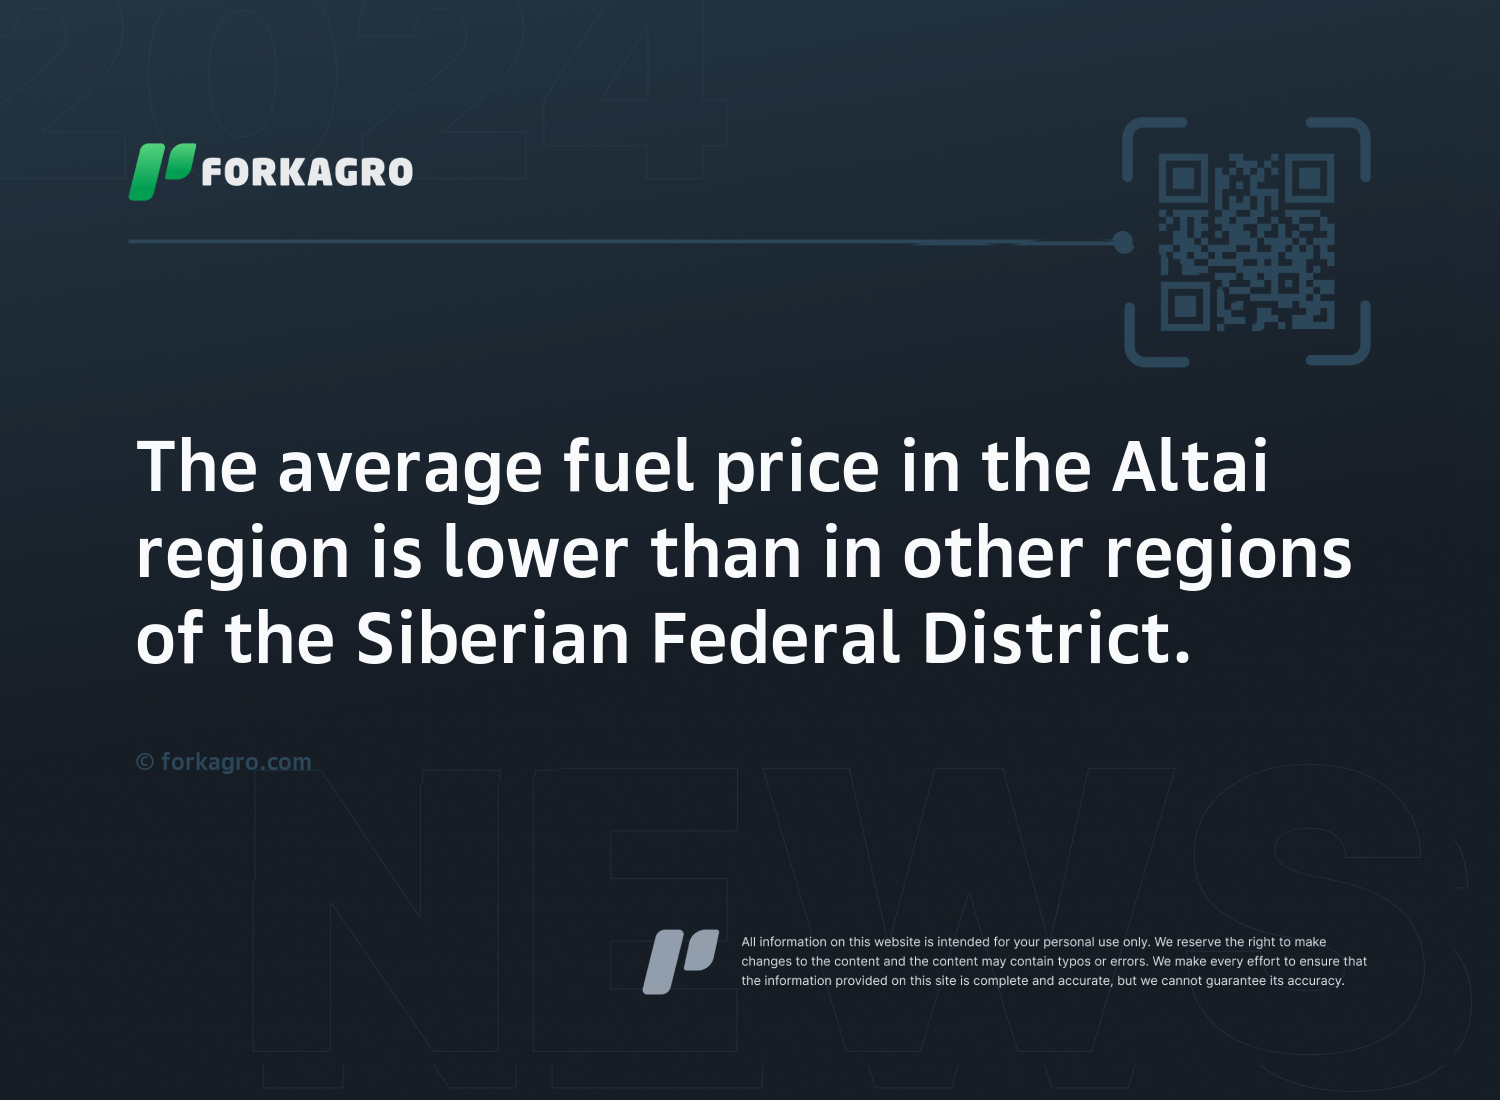 The average fuel price in the Altai region is lower than in other regions of the Siberian Federal District.